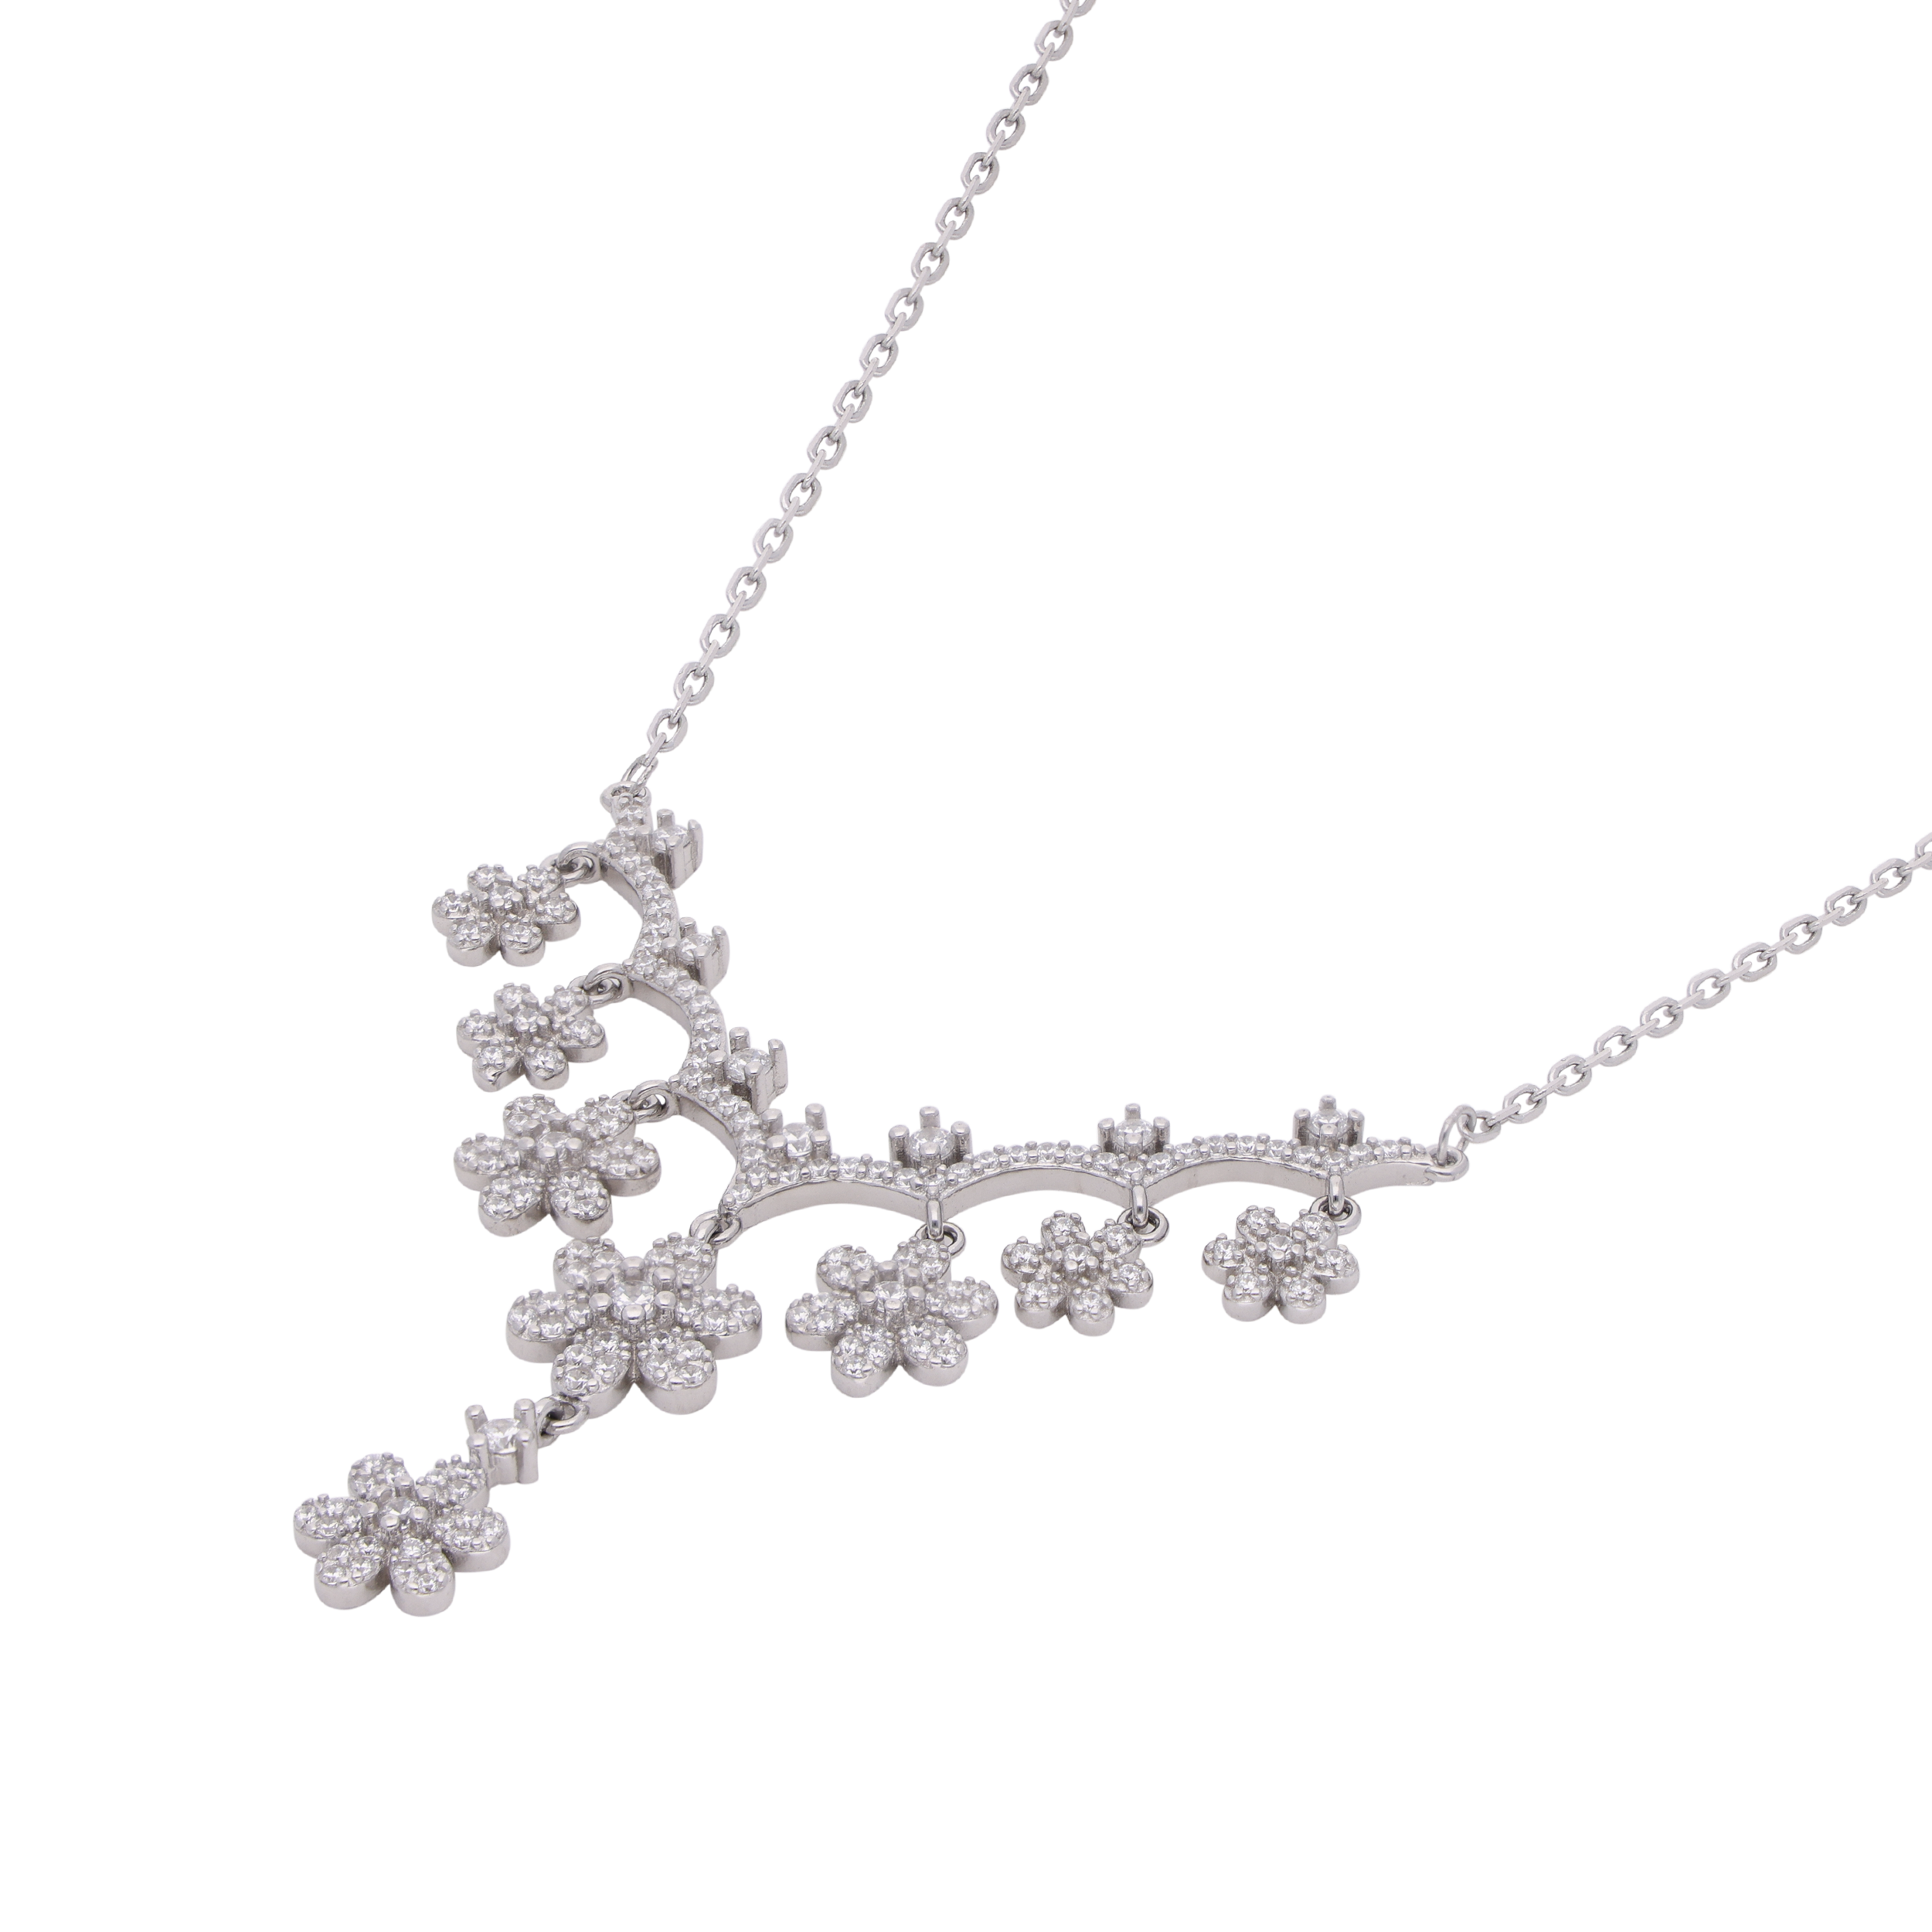 Floral Elegance: Sterling Silver Double Hook Chain Pendant Studded with Cubic Zircons | SKU : 0003113769